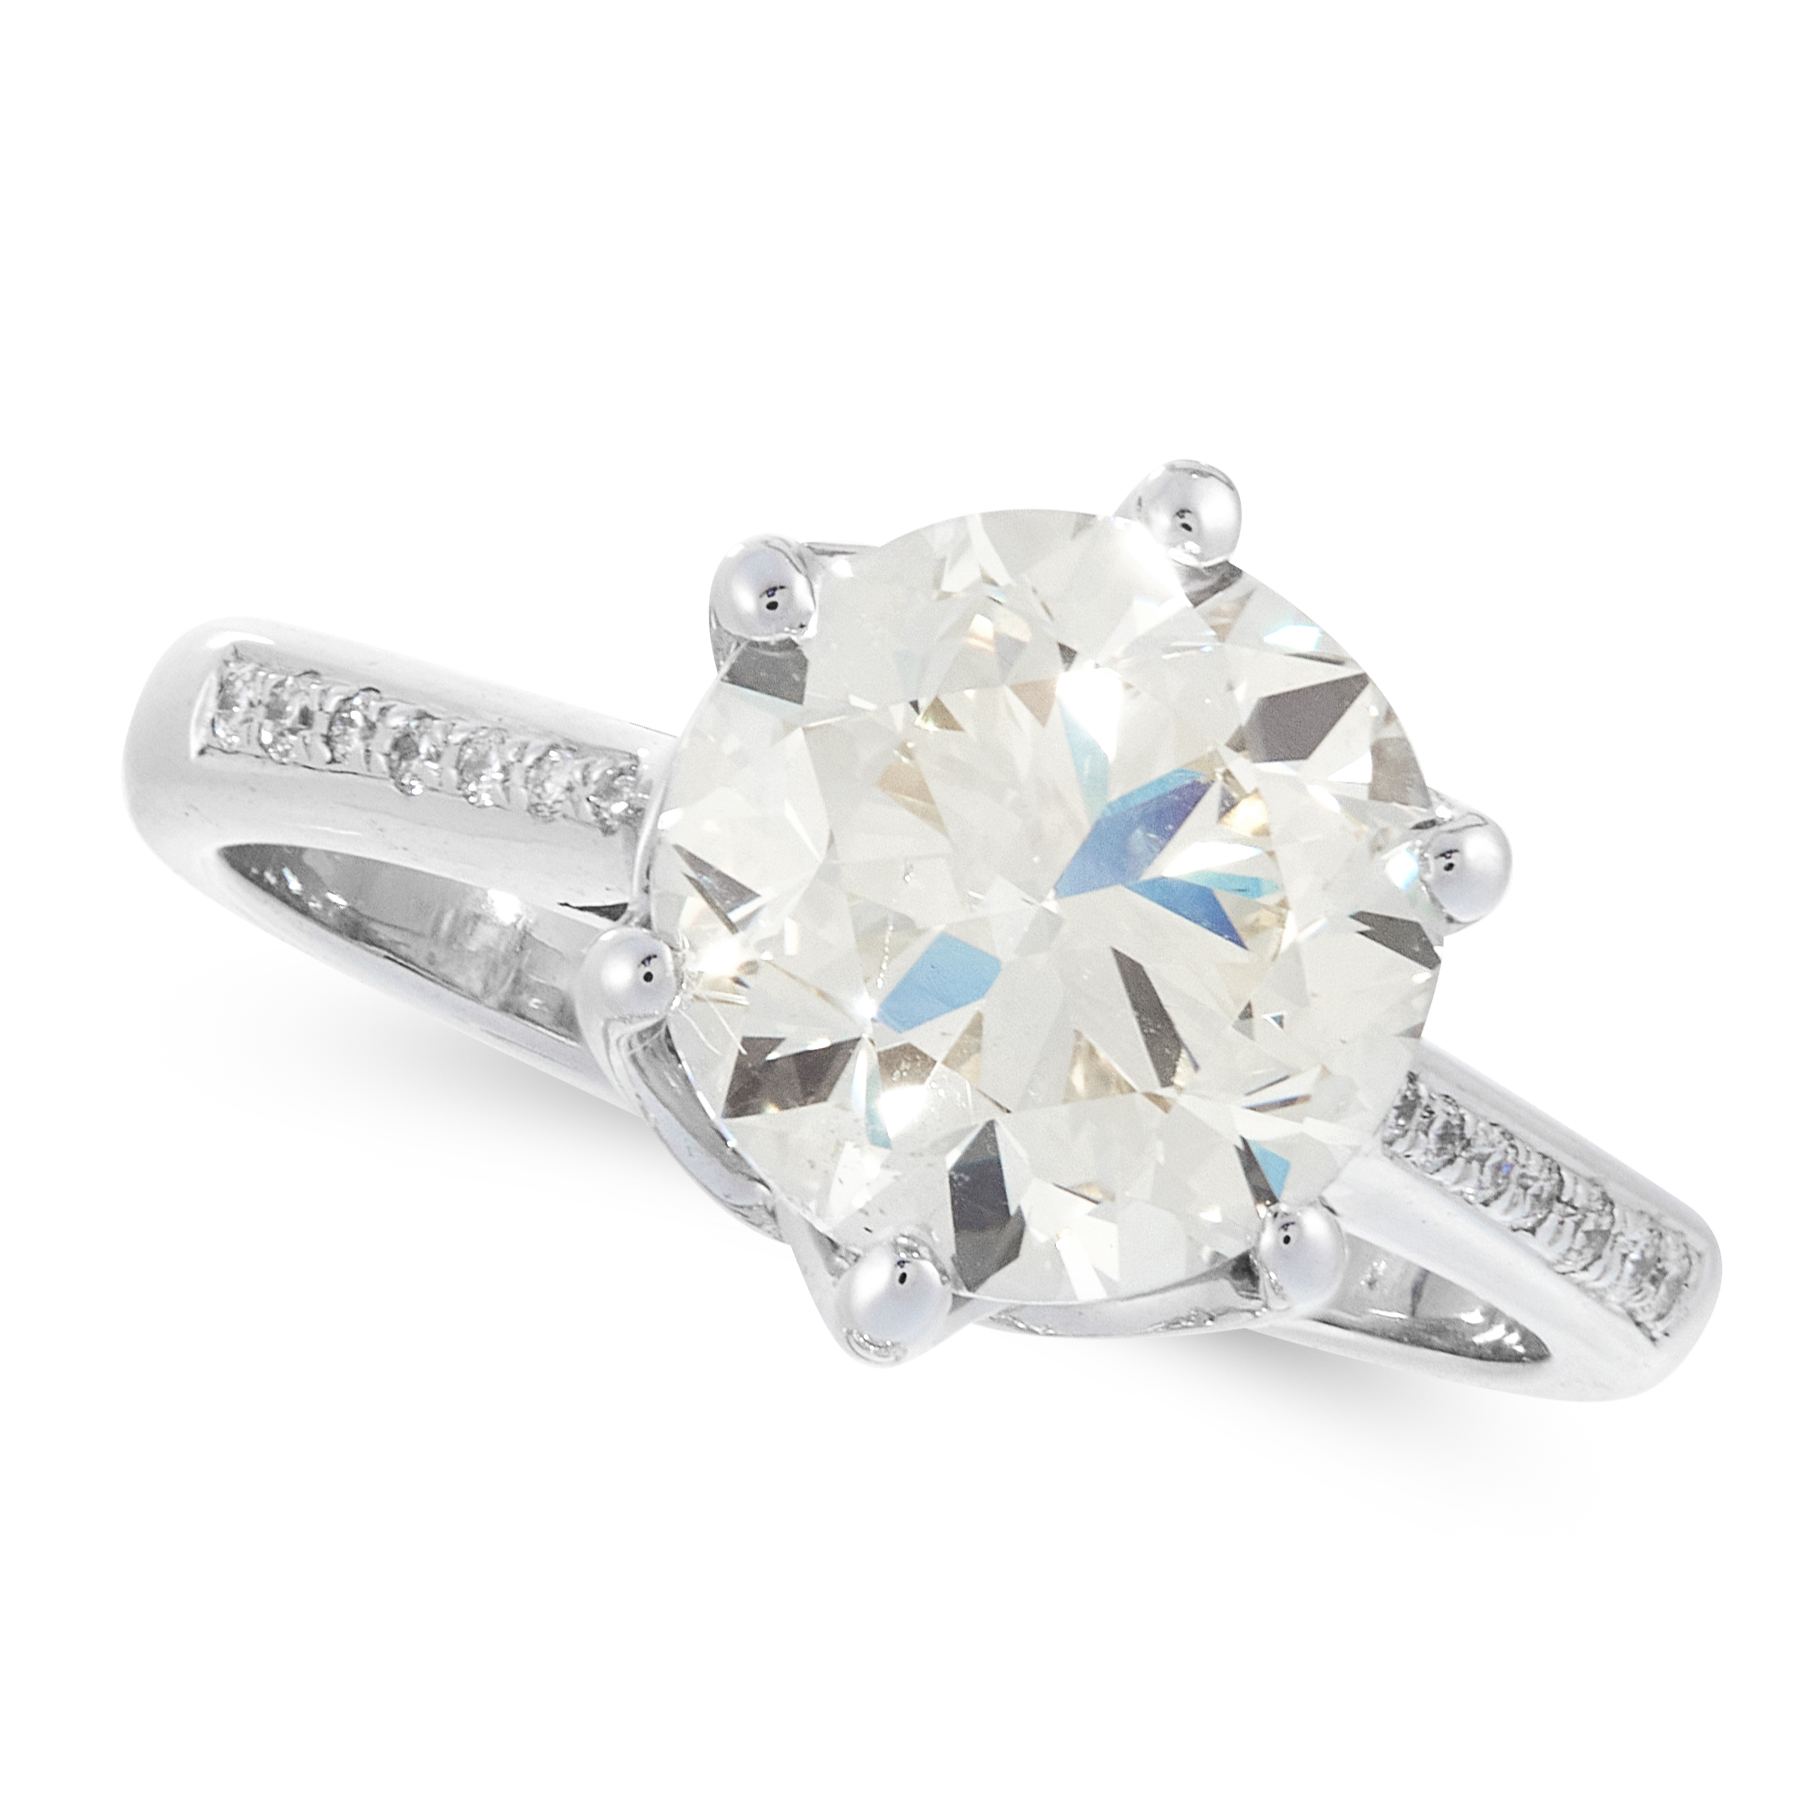 A DIAMOND SOLITAIRE RING in 18ct white gold, set with a round cut diamond of 3.01, the shoulders are